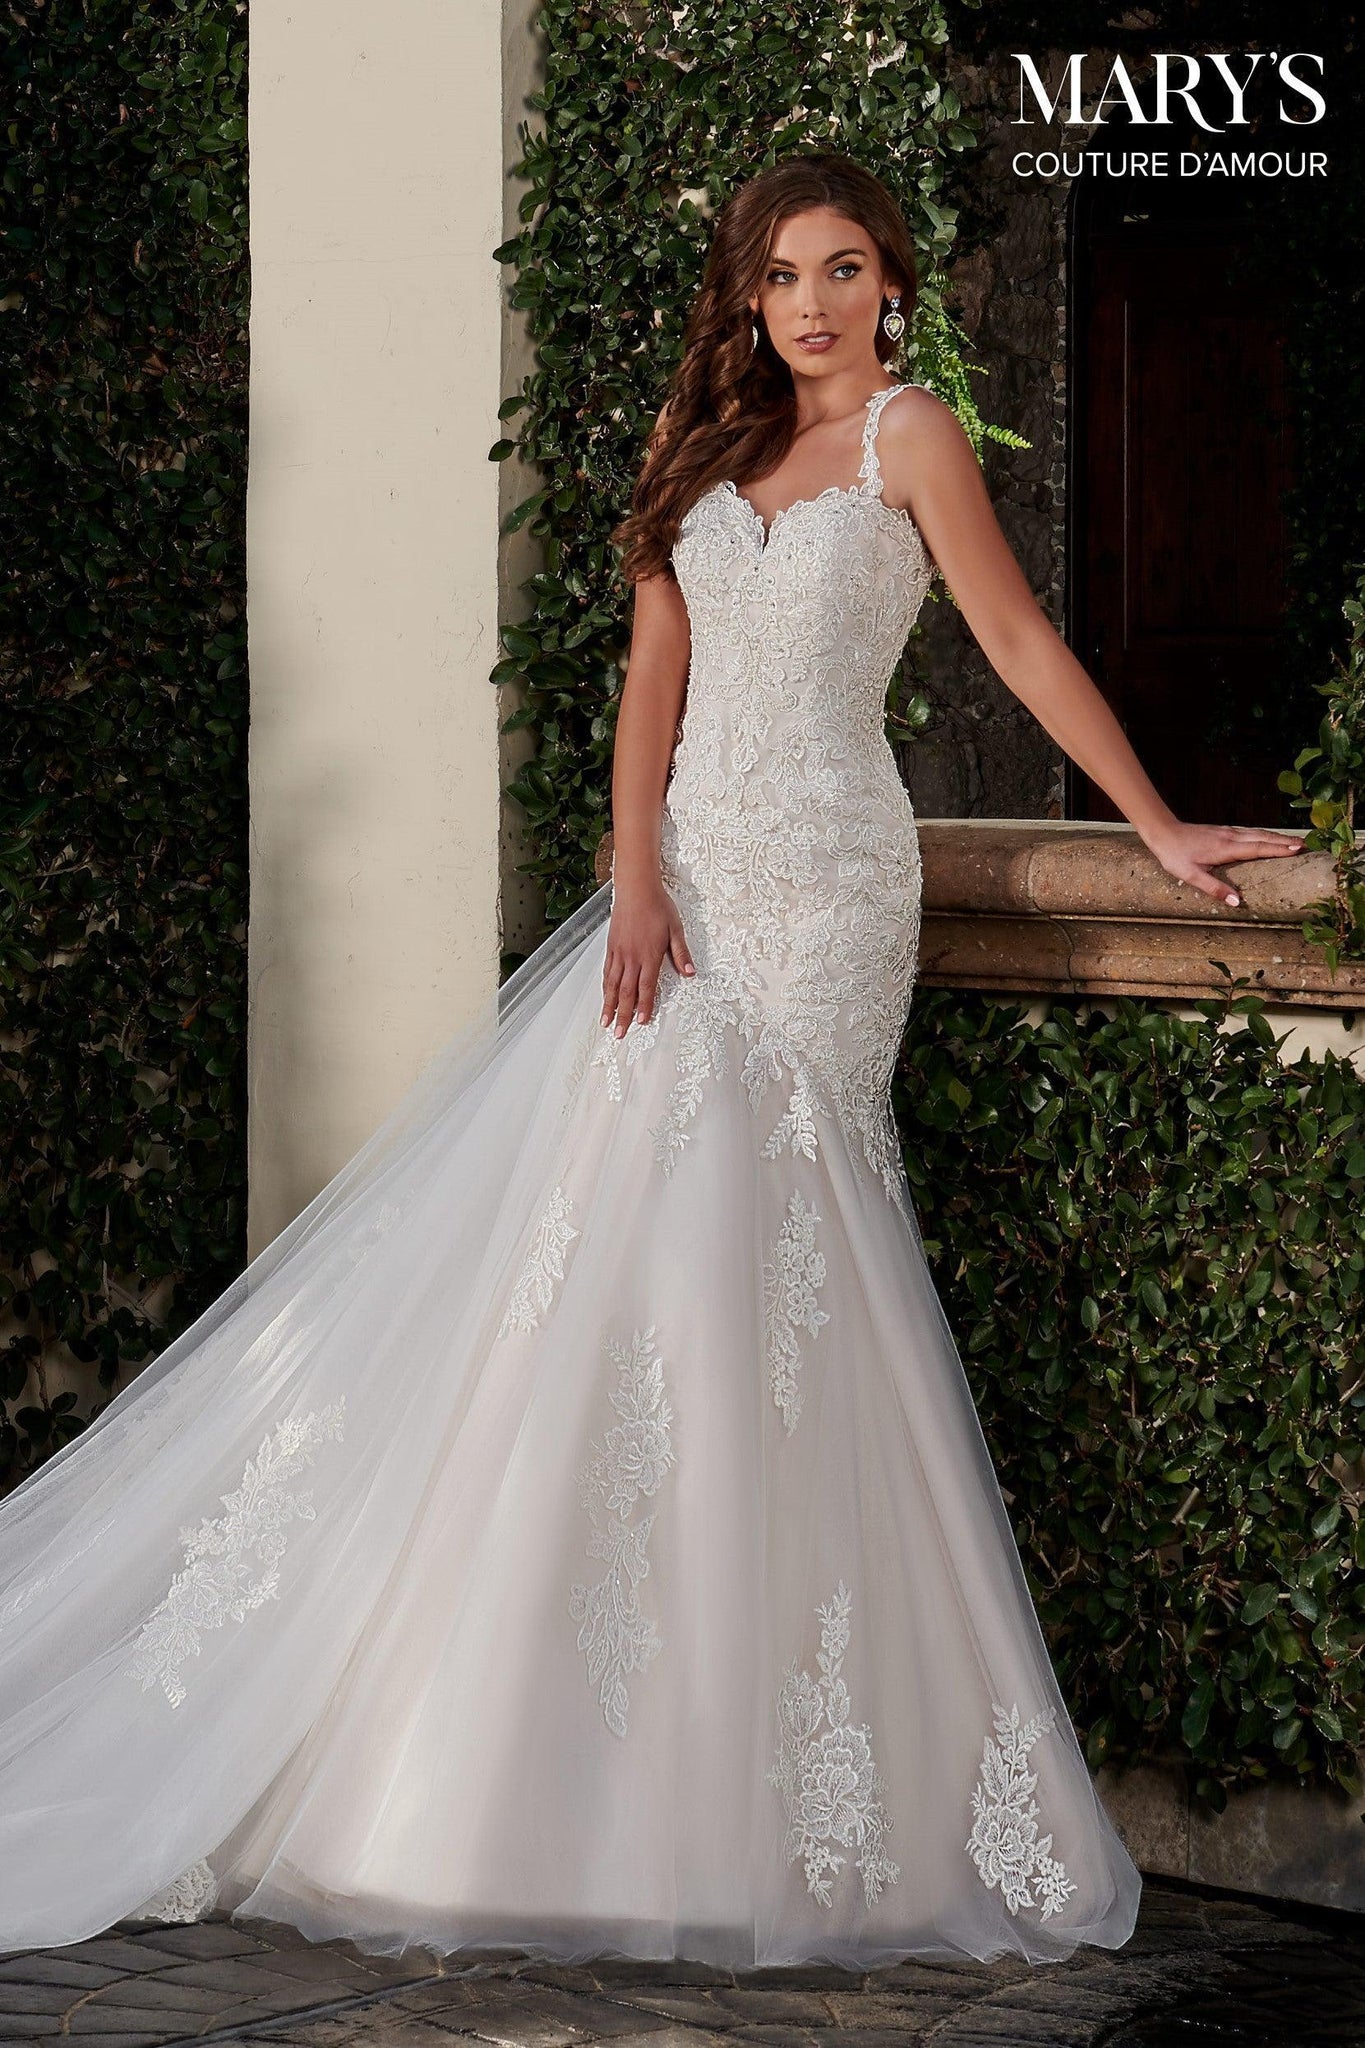 MARY'S BRIDAL - Cybille - Adore Bridal and Occasion Wear